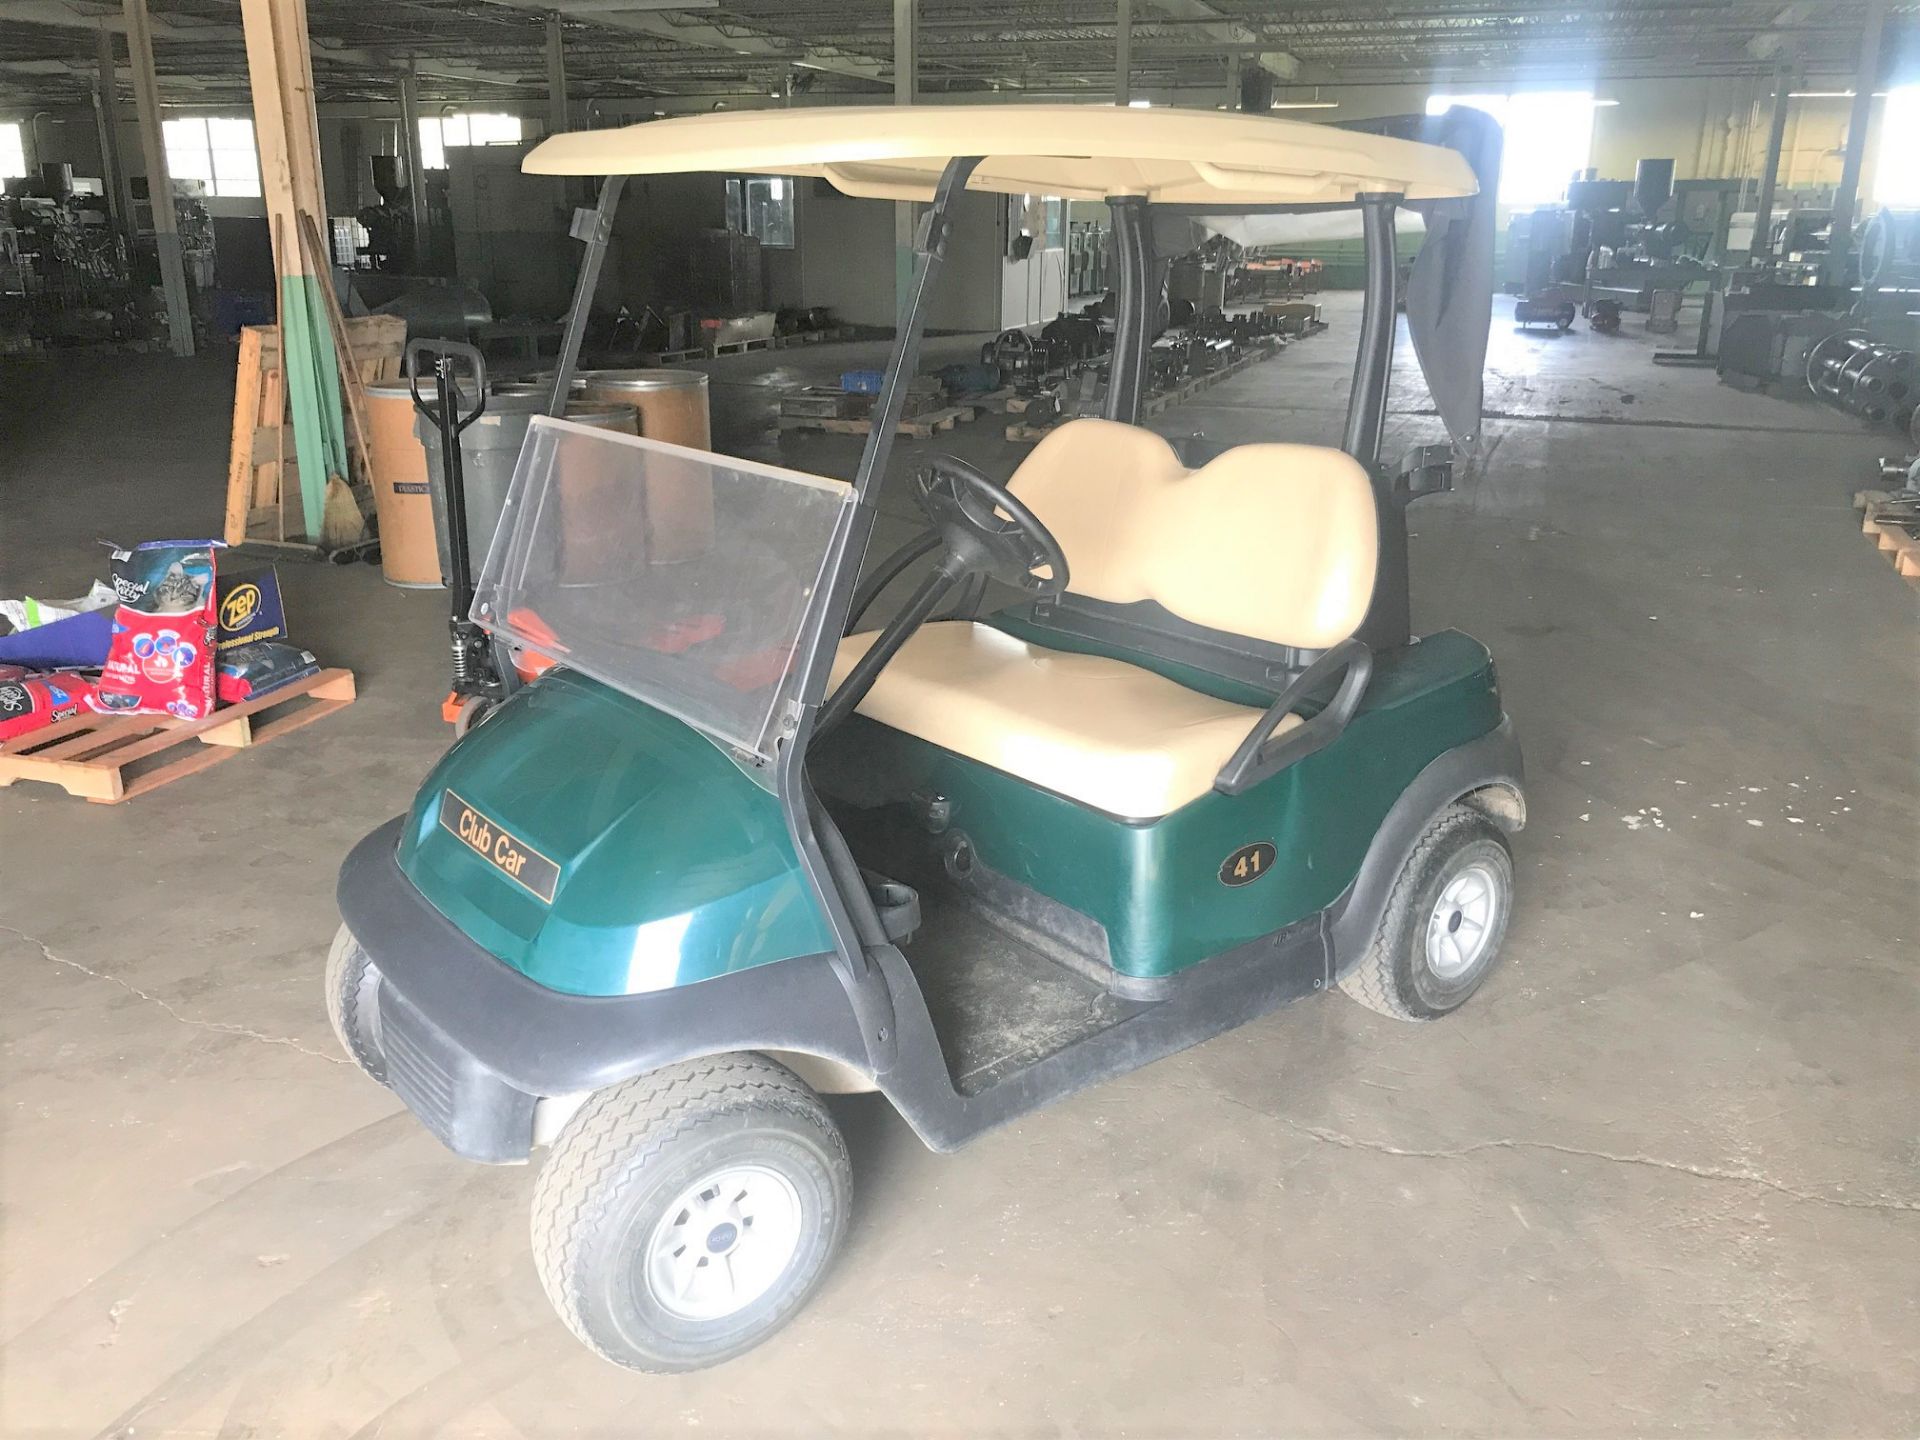 2013 Club Car Precedent i2, Electric, 48 volt with charger